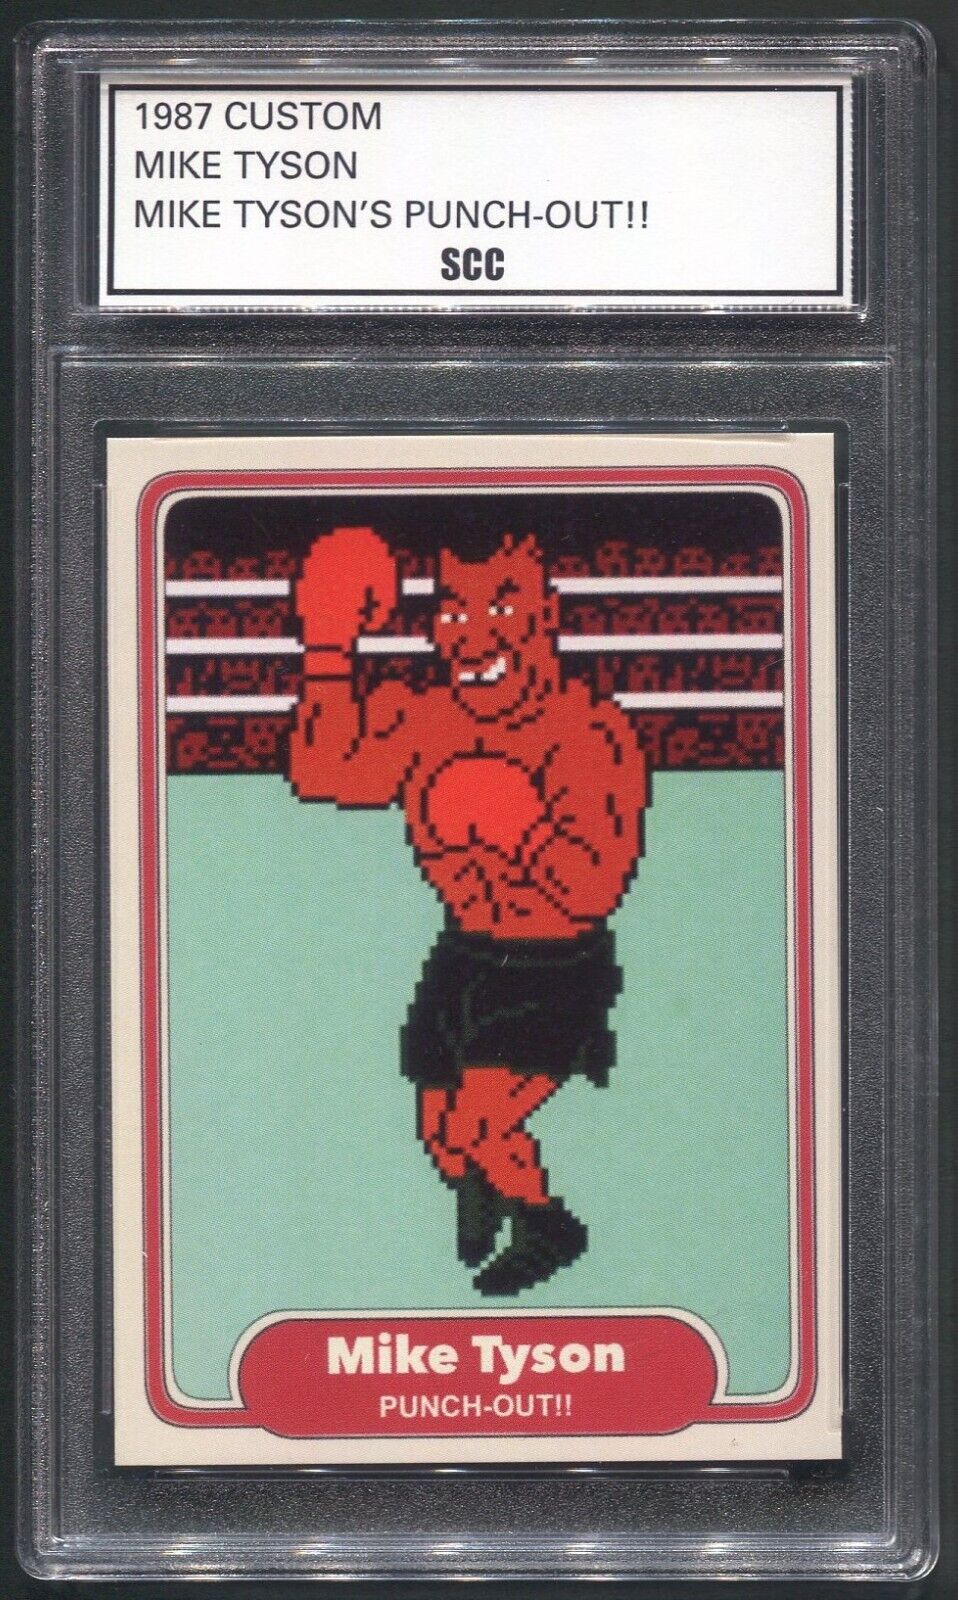 Custom 1987 Mike Tyson Punch-Out Video Game Trading Card